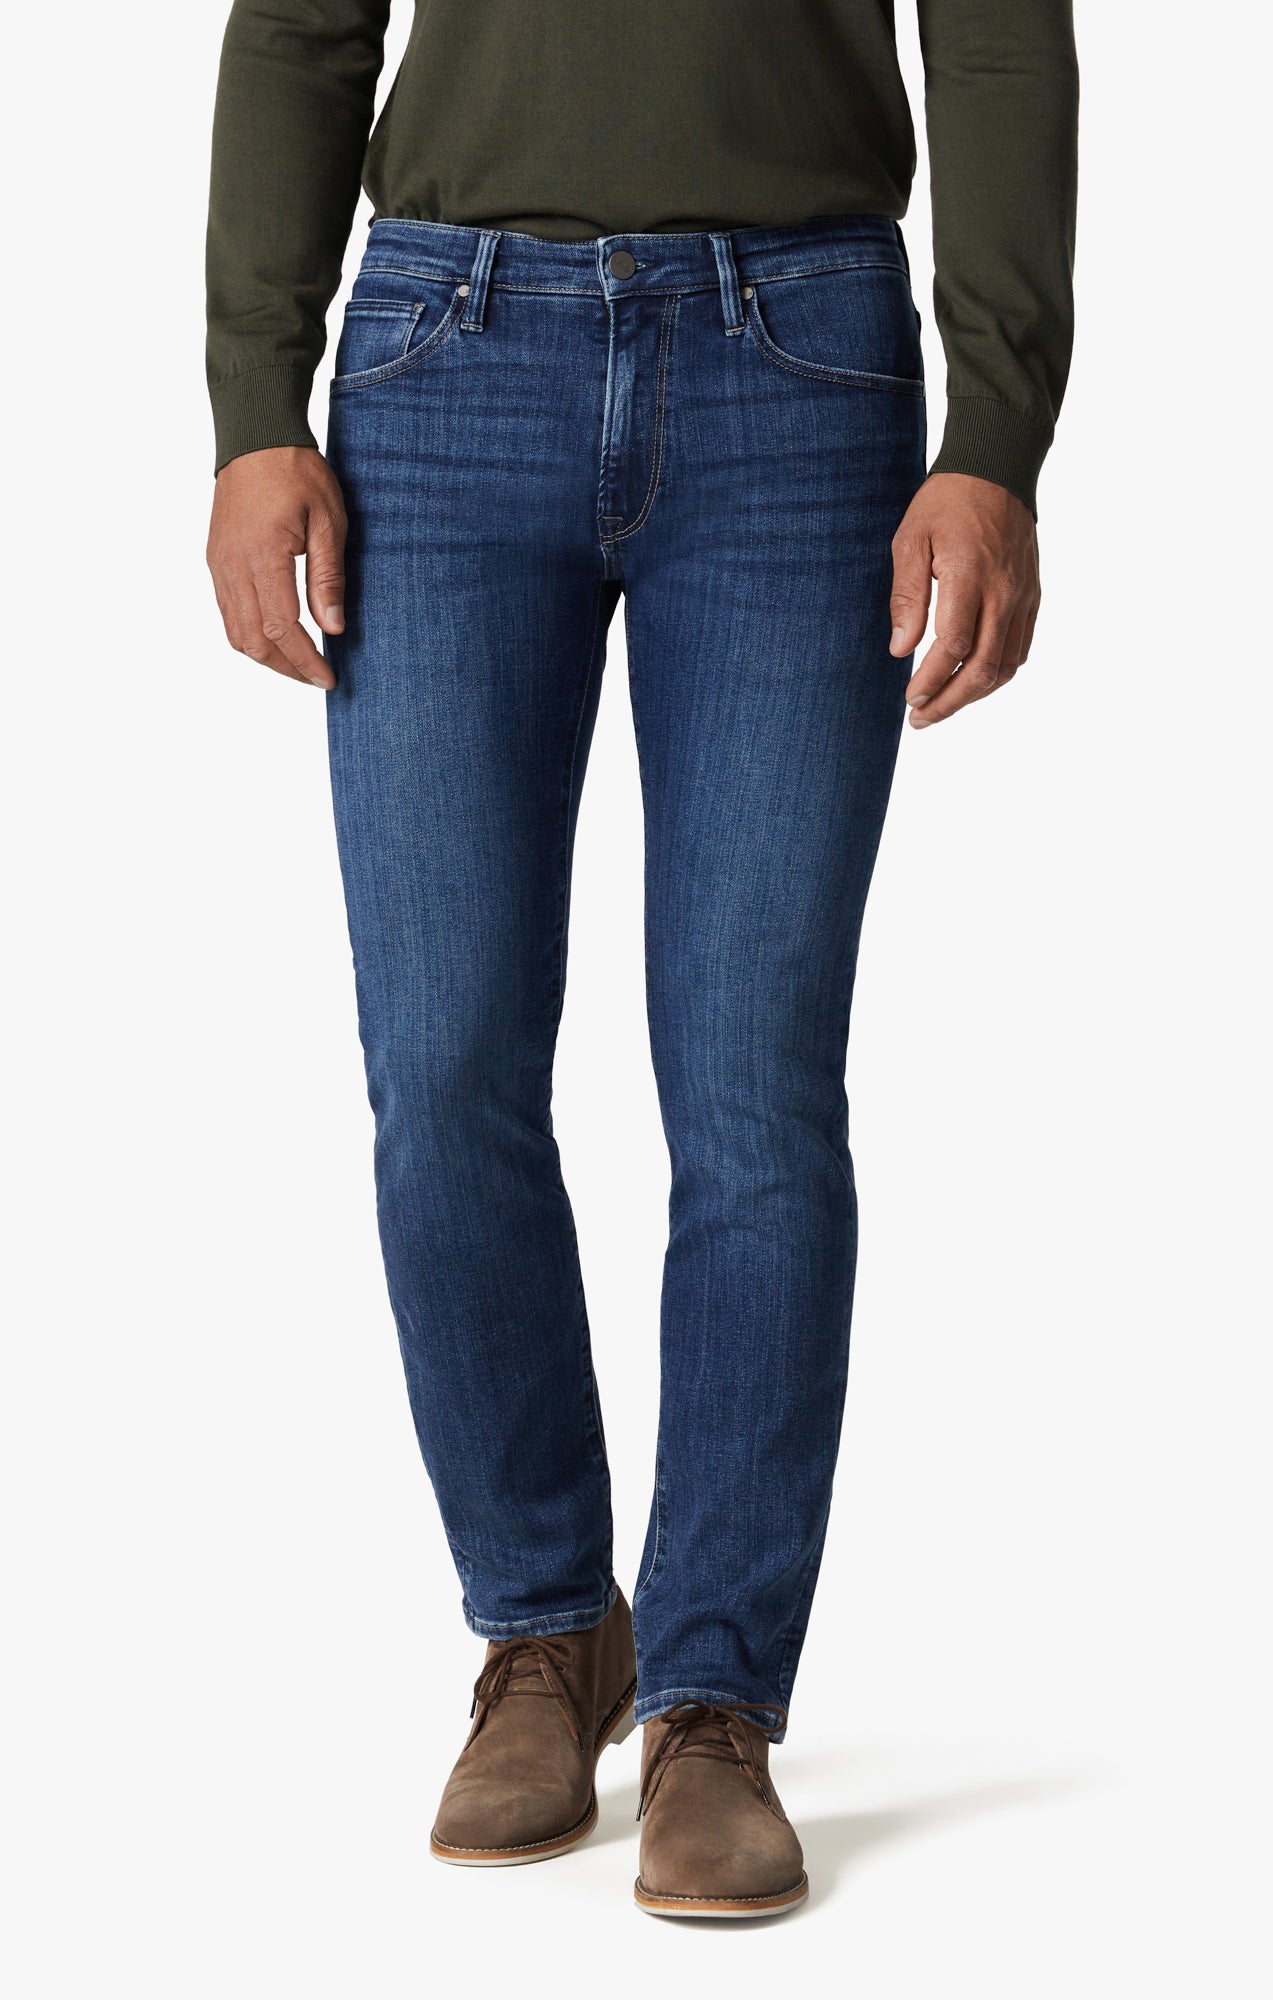 Courage Straight Leg Jeans in Deep Brushed Organic Image 2